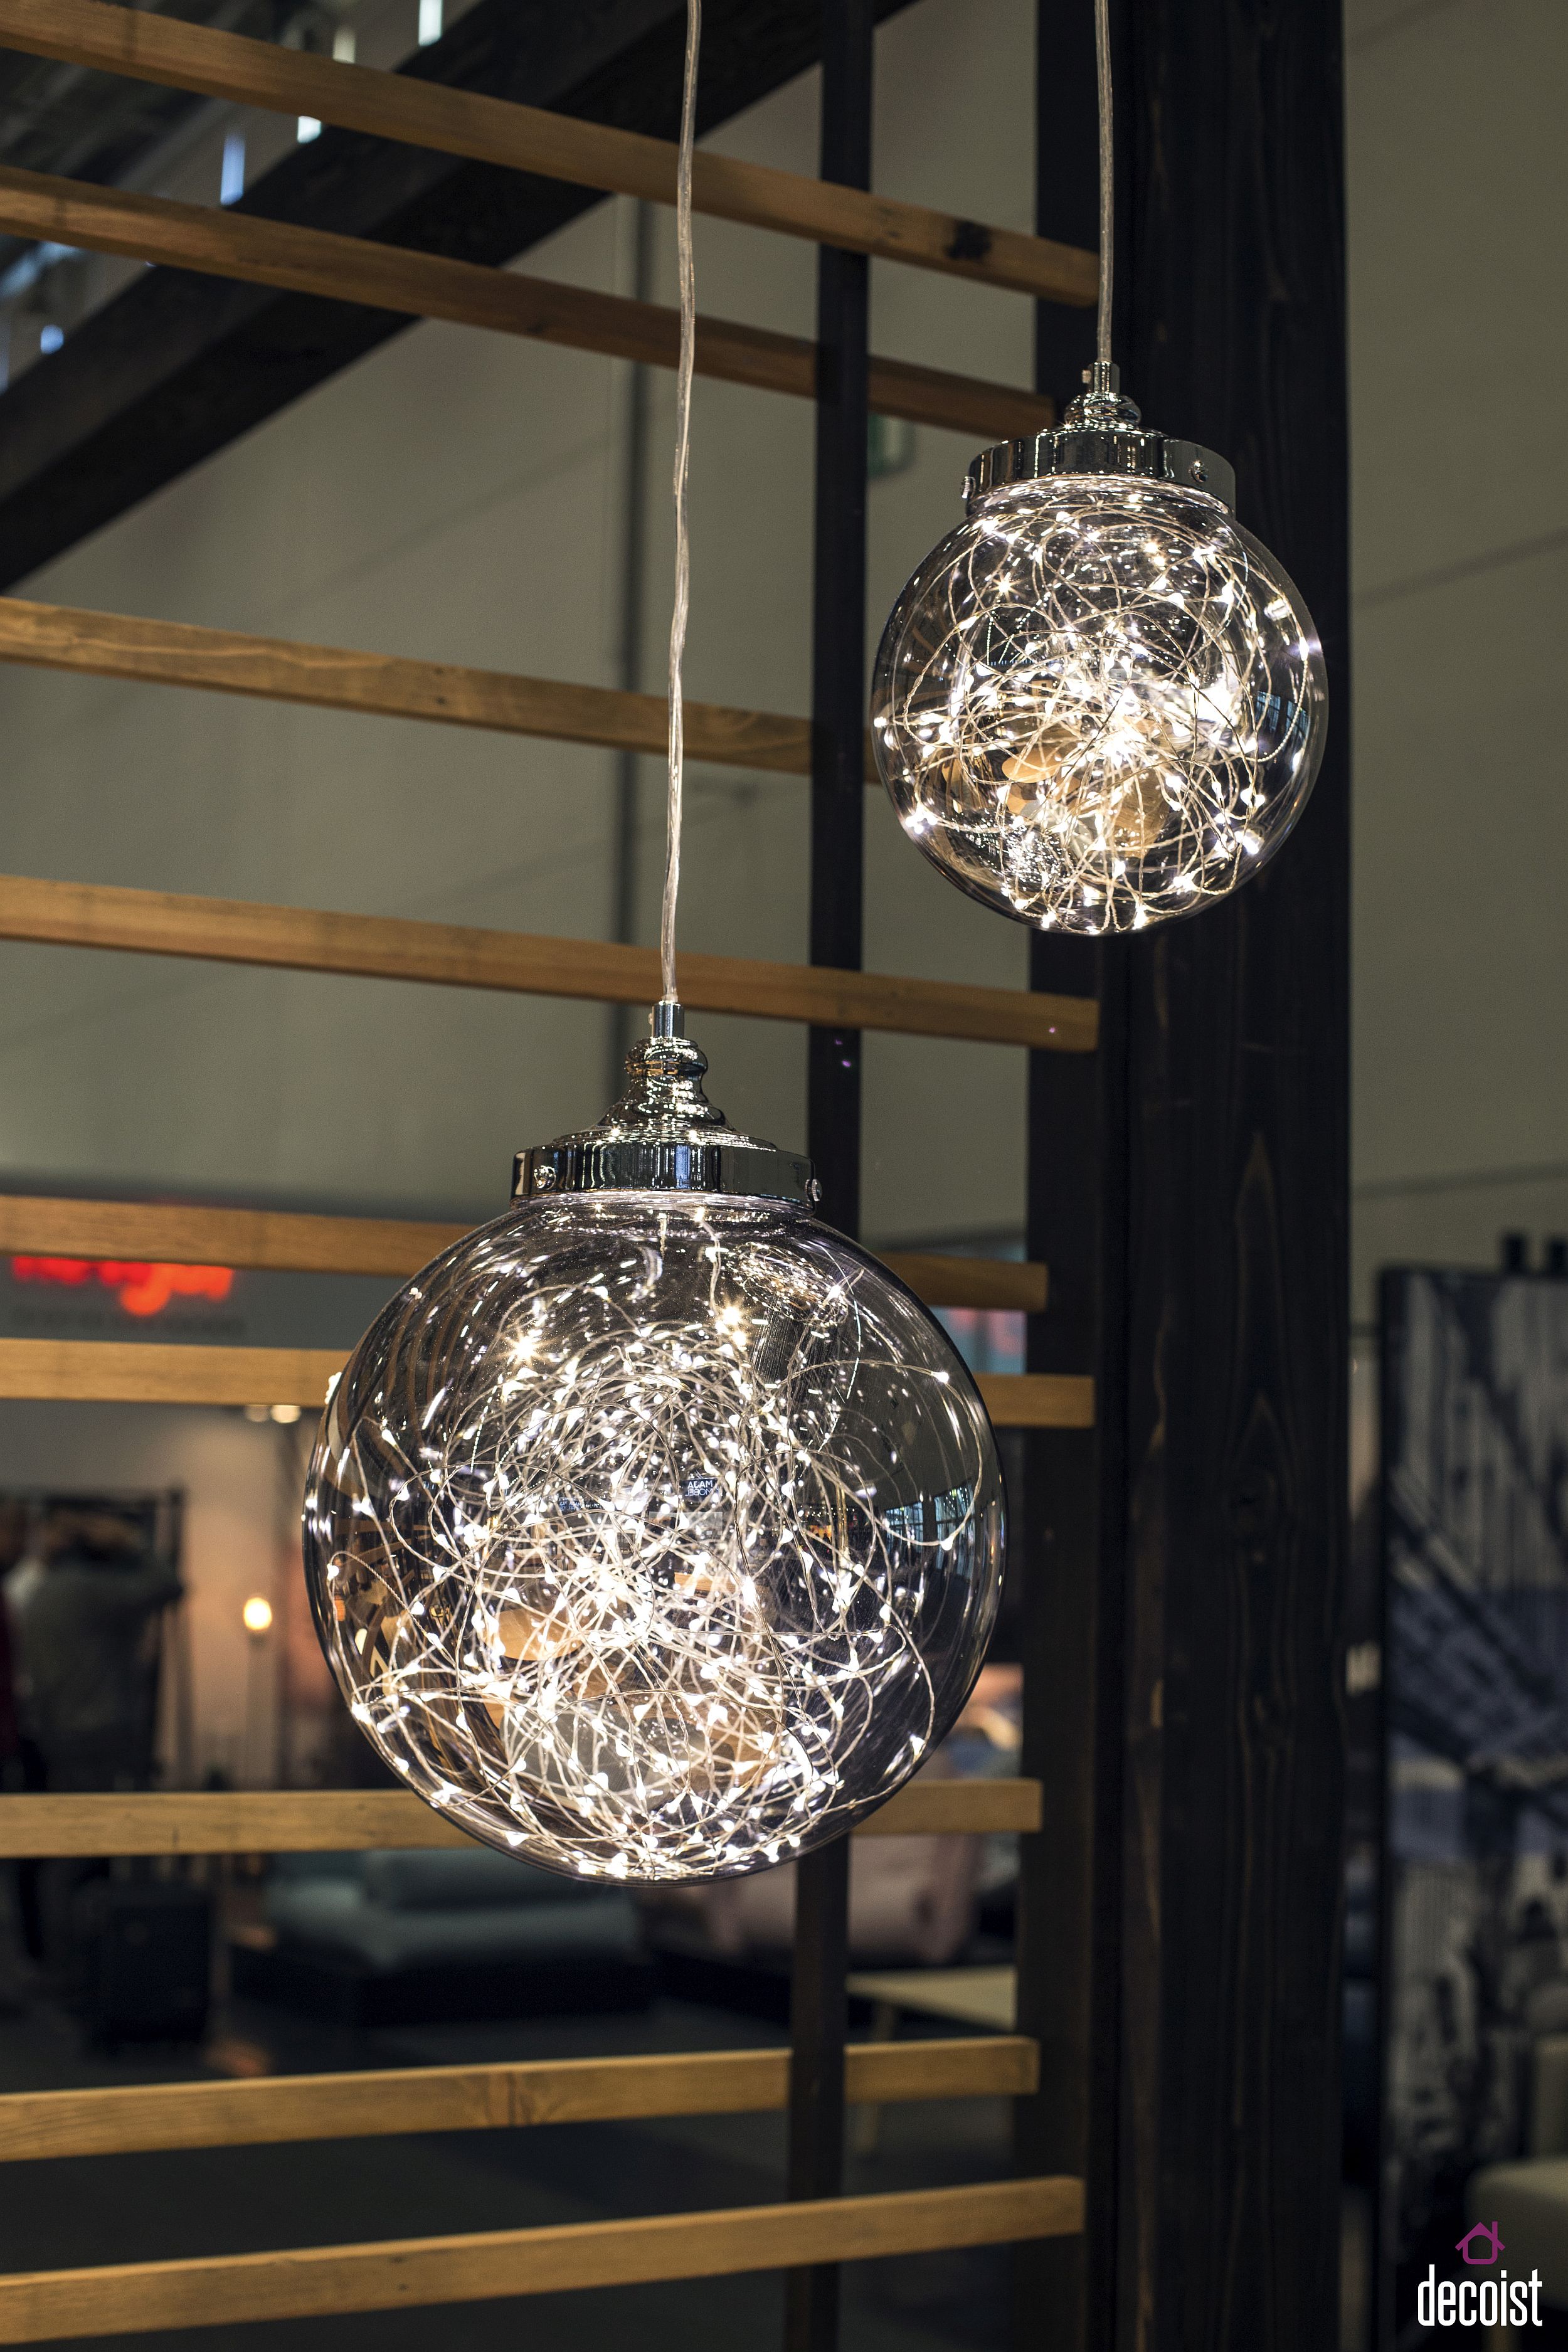 Sparkling-pendant-lights-bring-home-holiday-cheer-by-combining-the-charm-of-globe-lamps-with-string-lighting